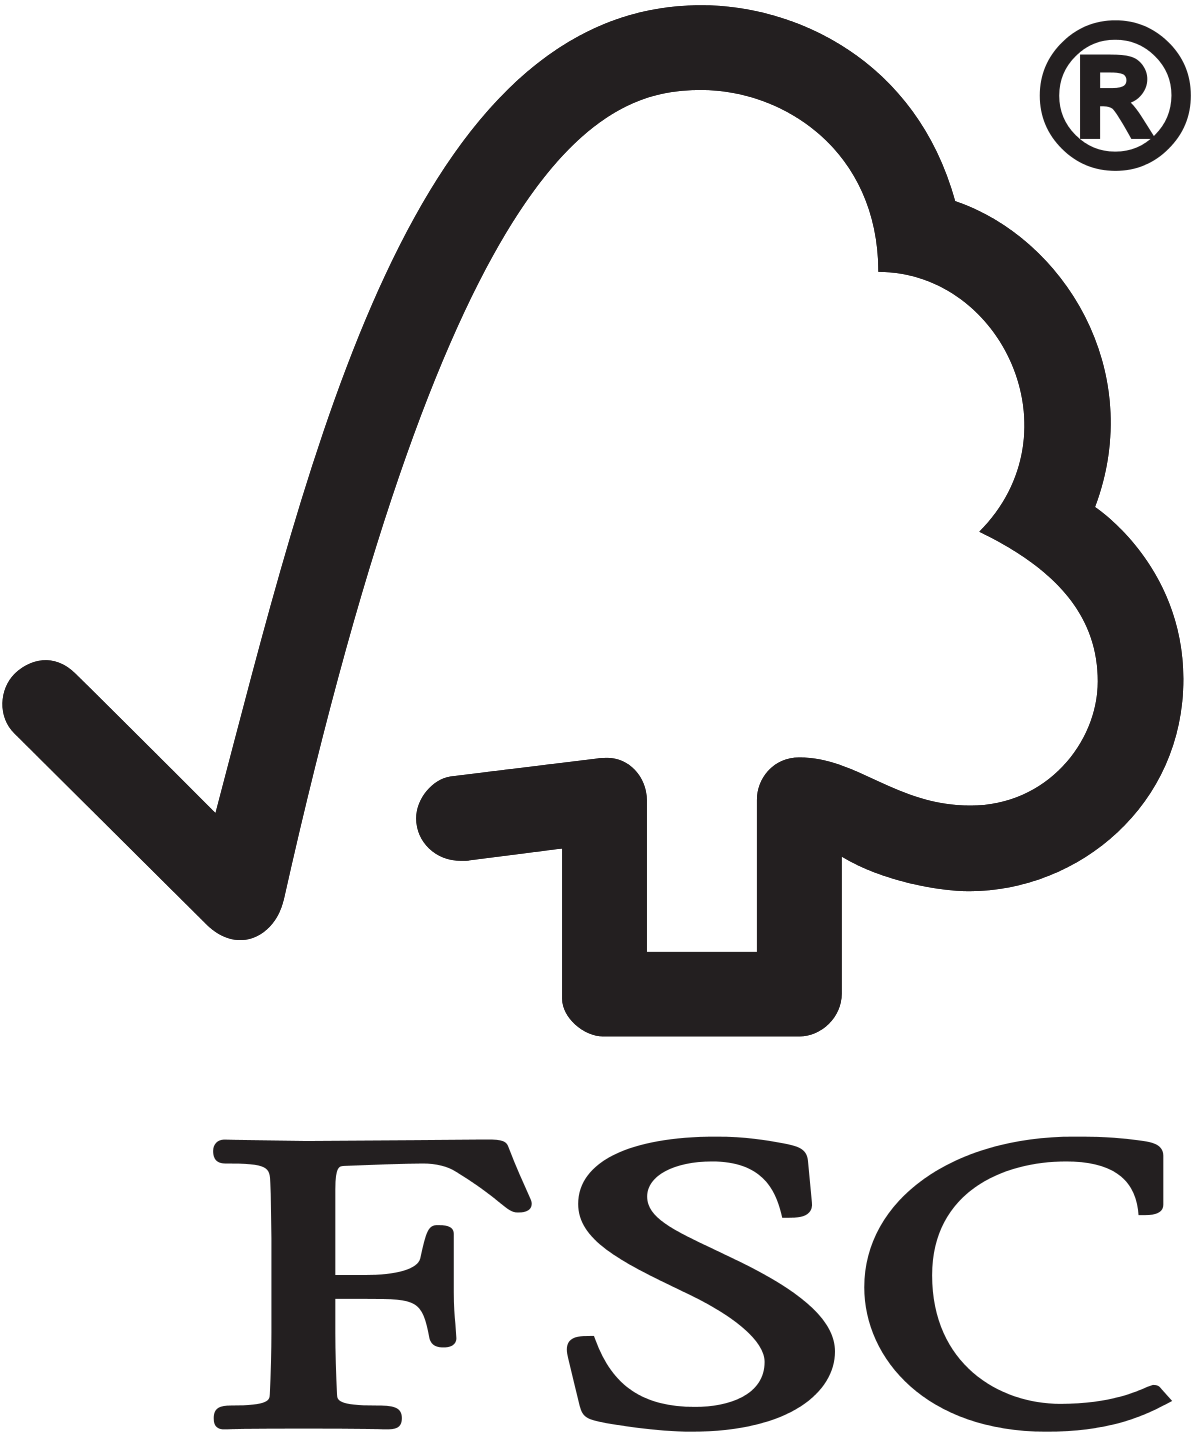 Forest stewardship council wikipedia. Stamp clipart certification